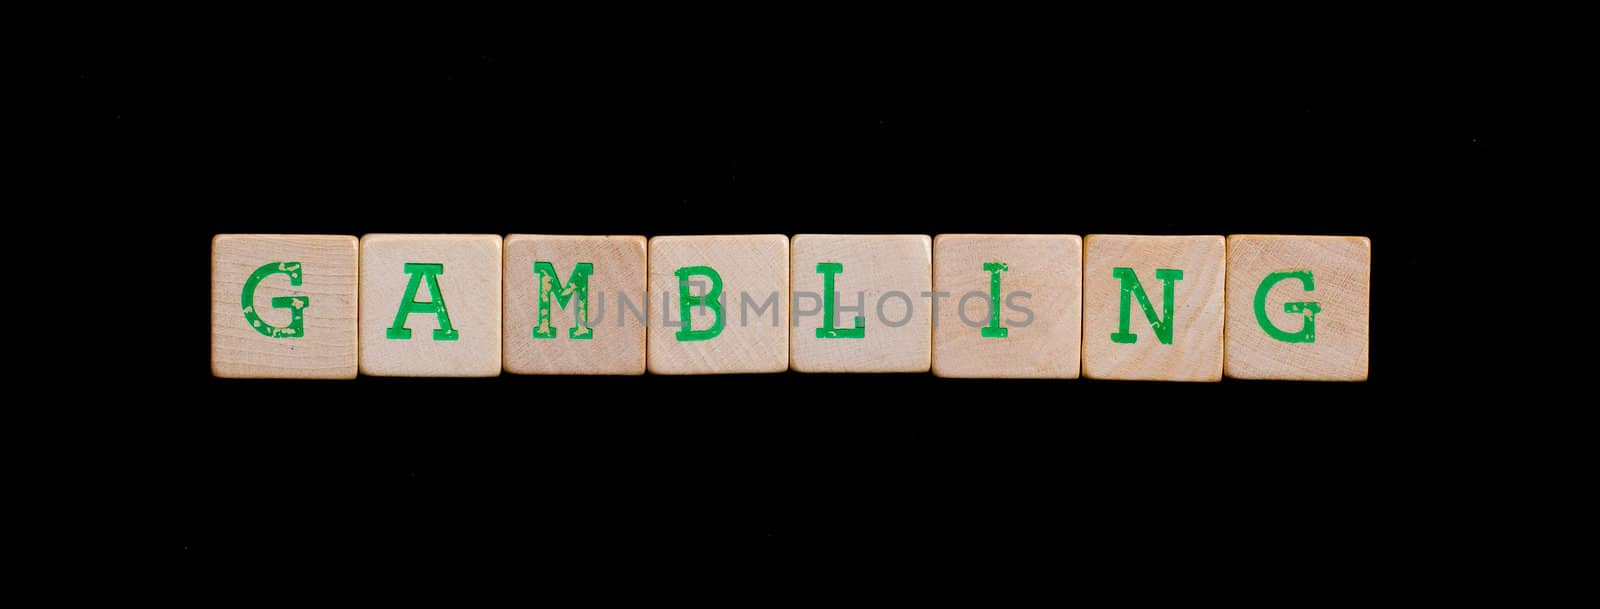 Green letters on old wooden blocks (gambling) by michaklootwijk